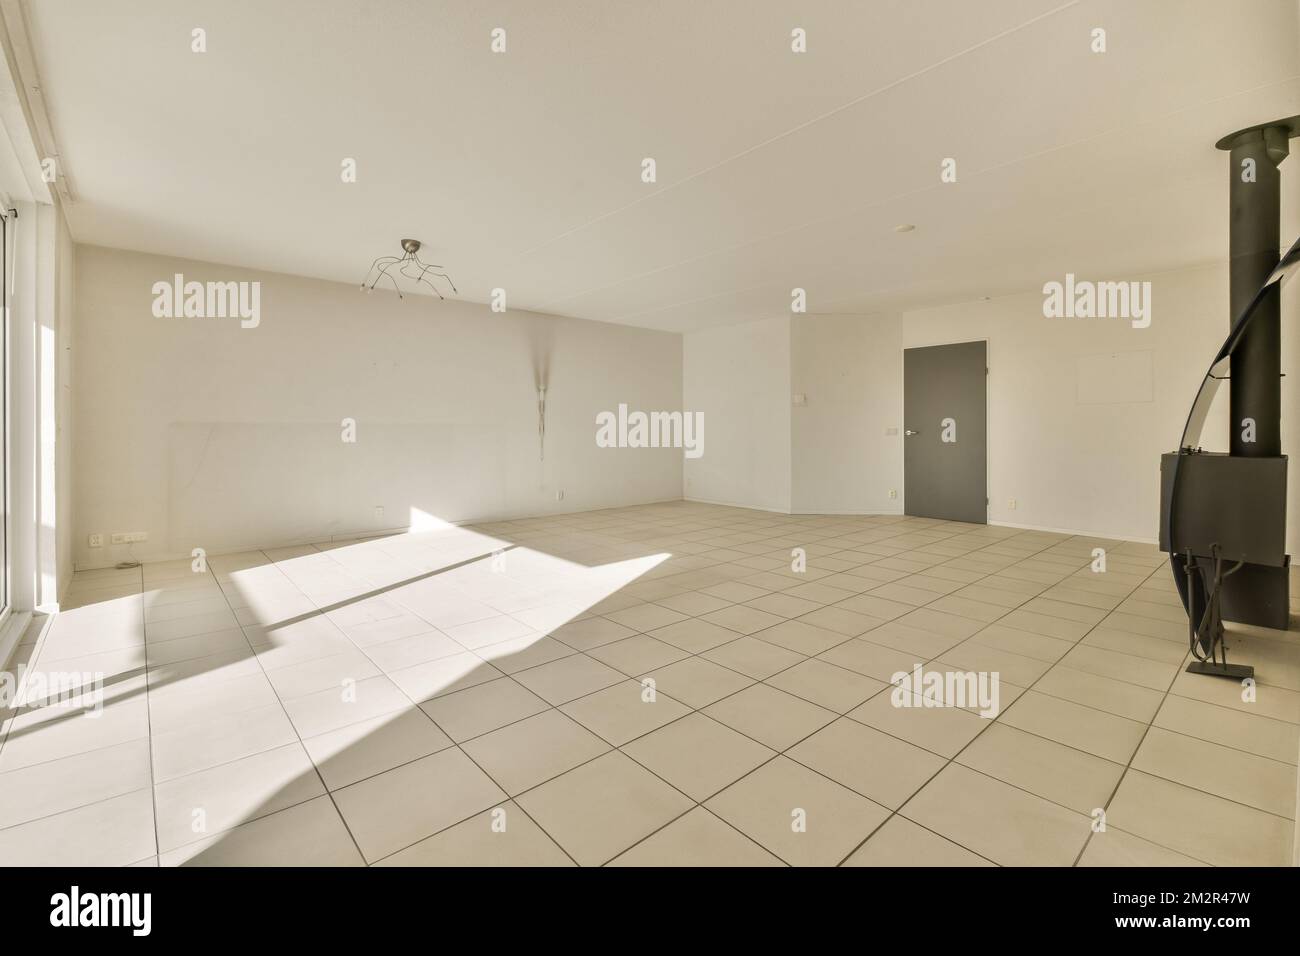 an empty room with white tile flooring and light coming in through the window to see what is going on Stock Photo